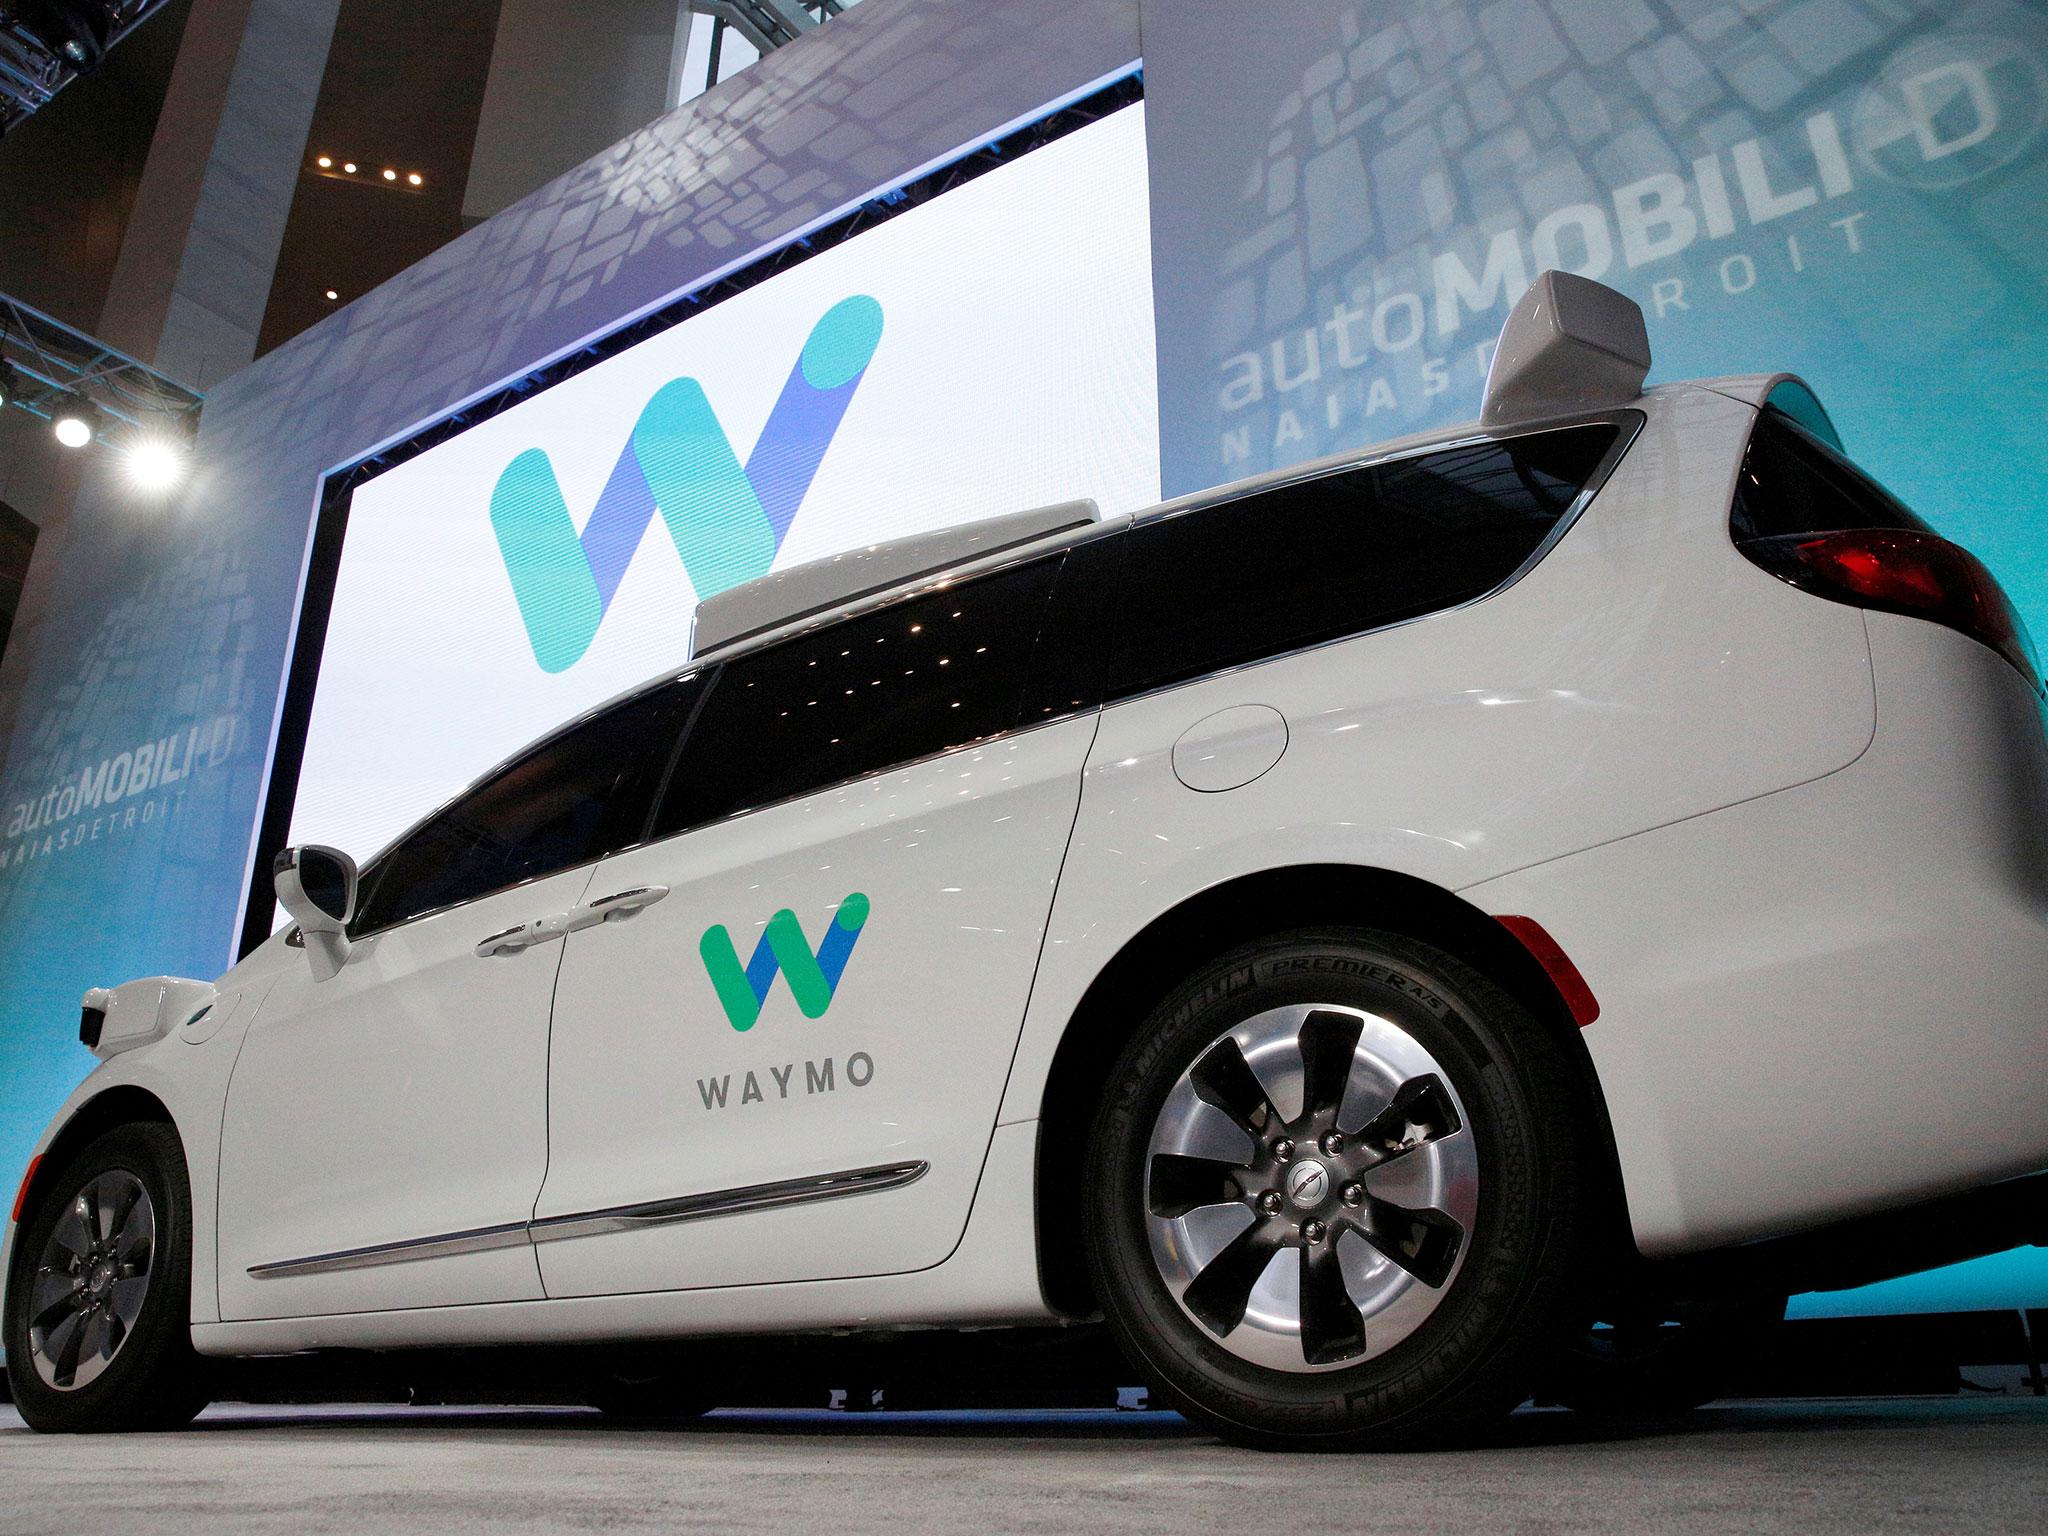 Waymo filed a lawsuit against Uber on Thursday accusing the ride-hailing company of stealing its trade secret